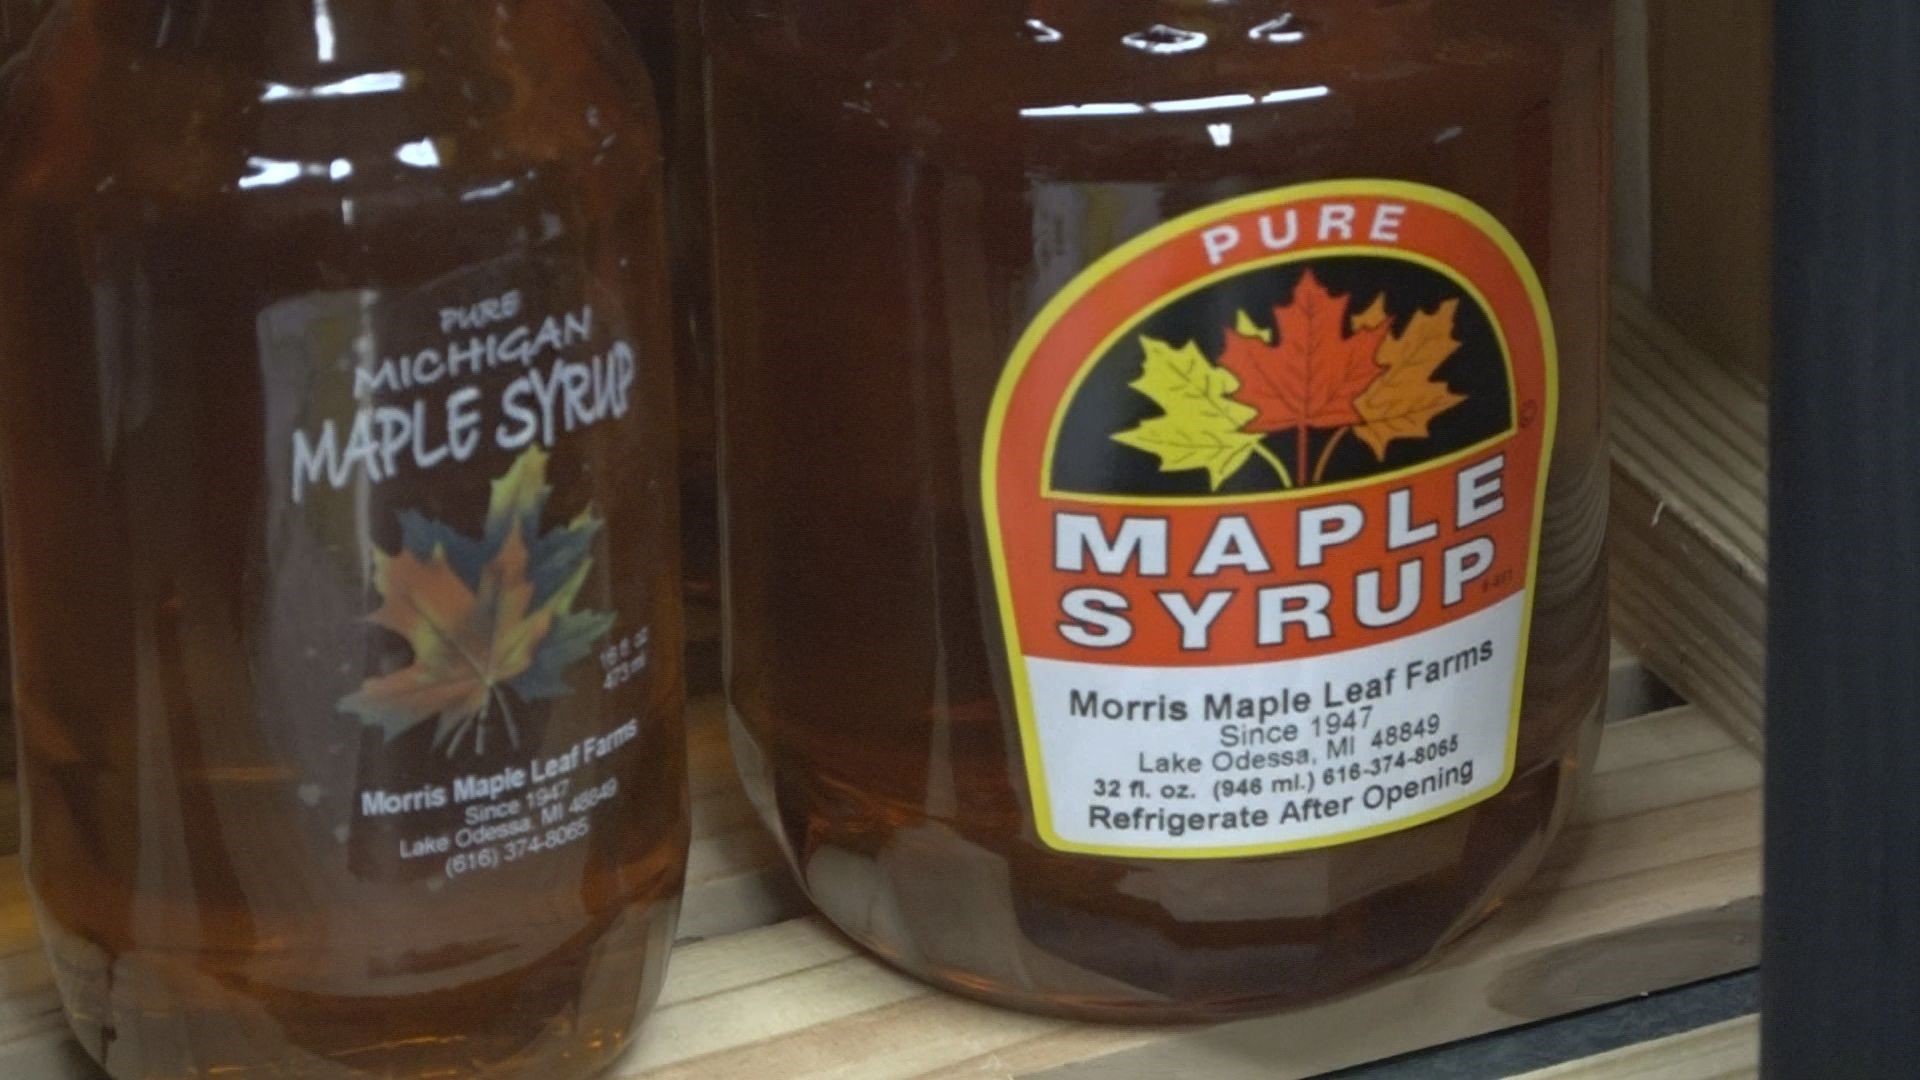 Warmer during the day, and freezing temperatures at night give the maple syrup season a great start.